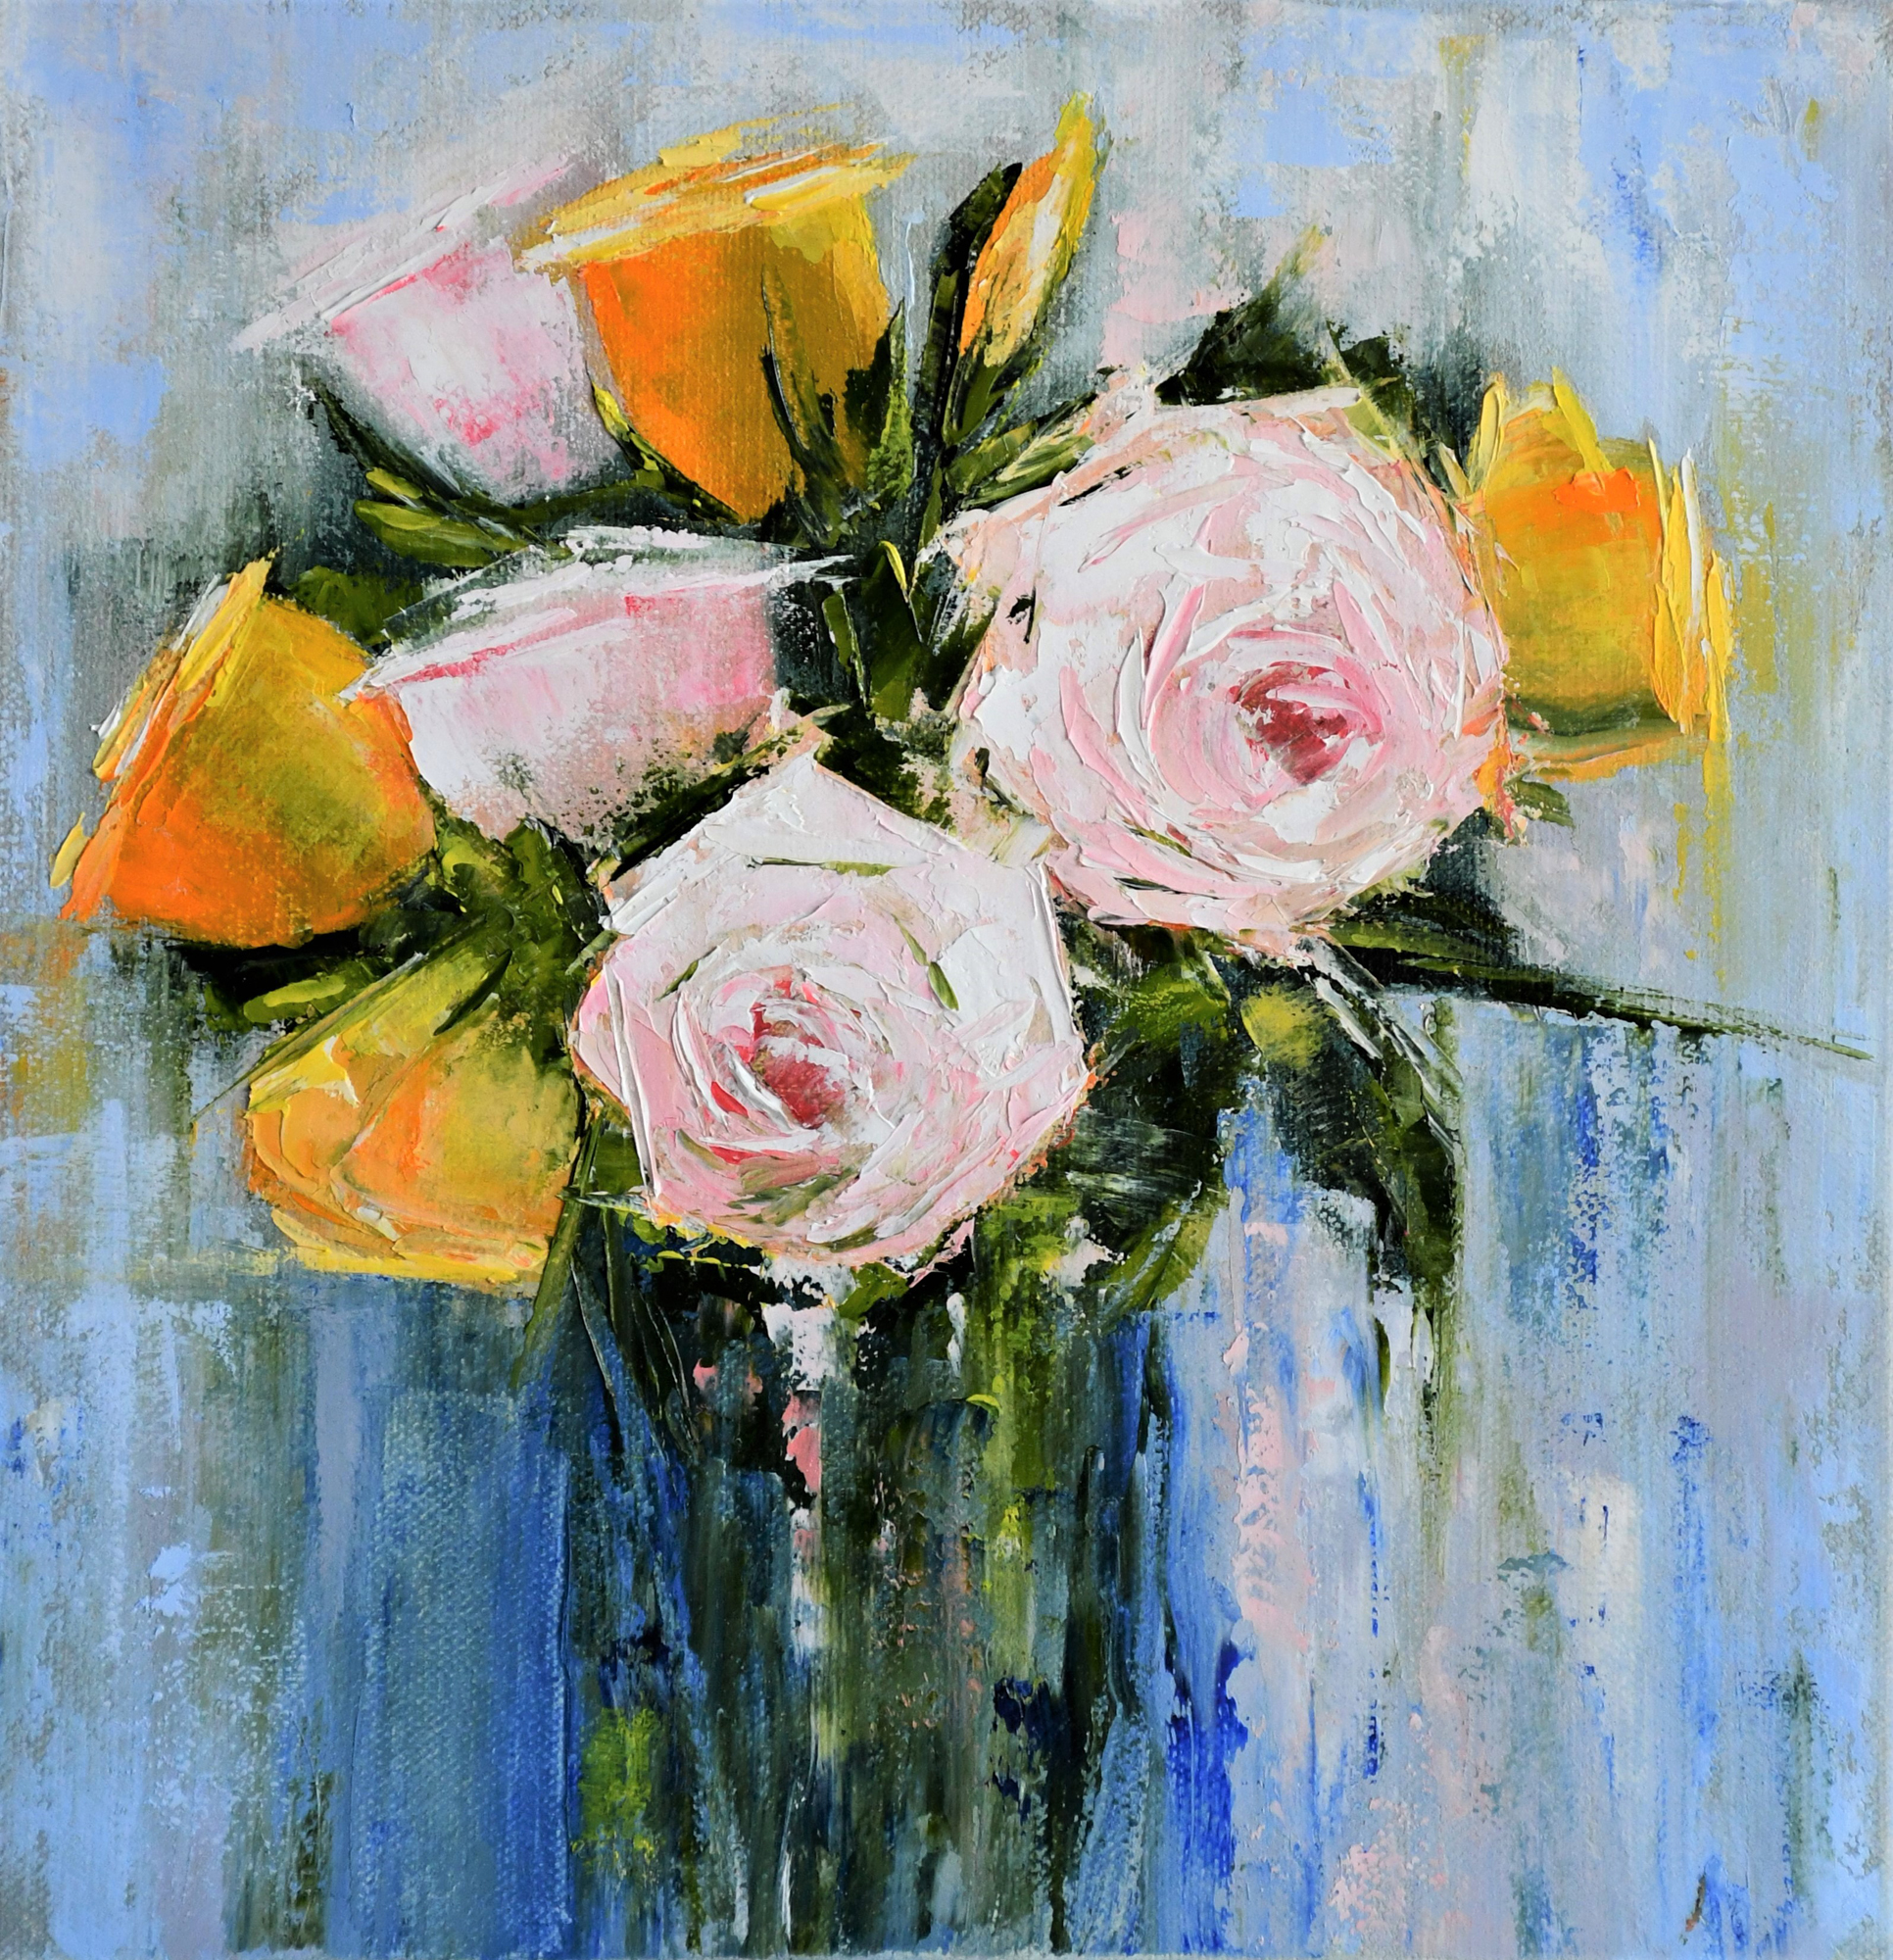 ROSES IN PINK AND YELLOW (Galina Holley)